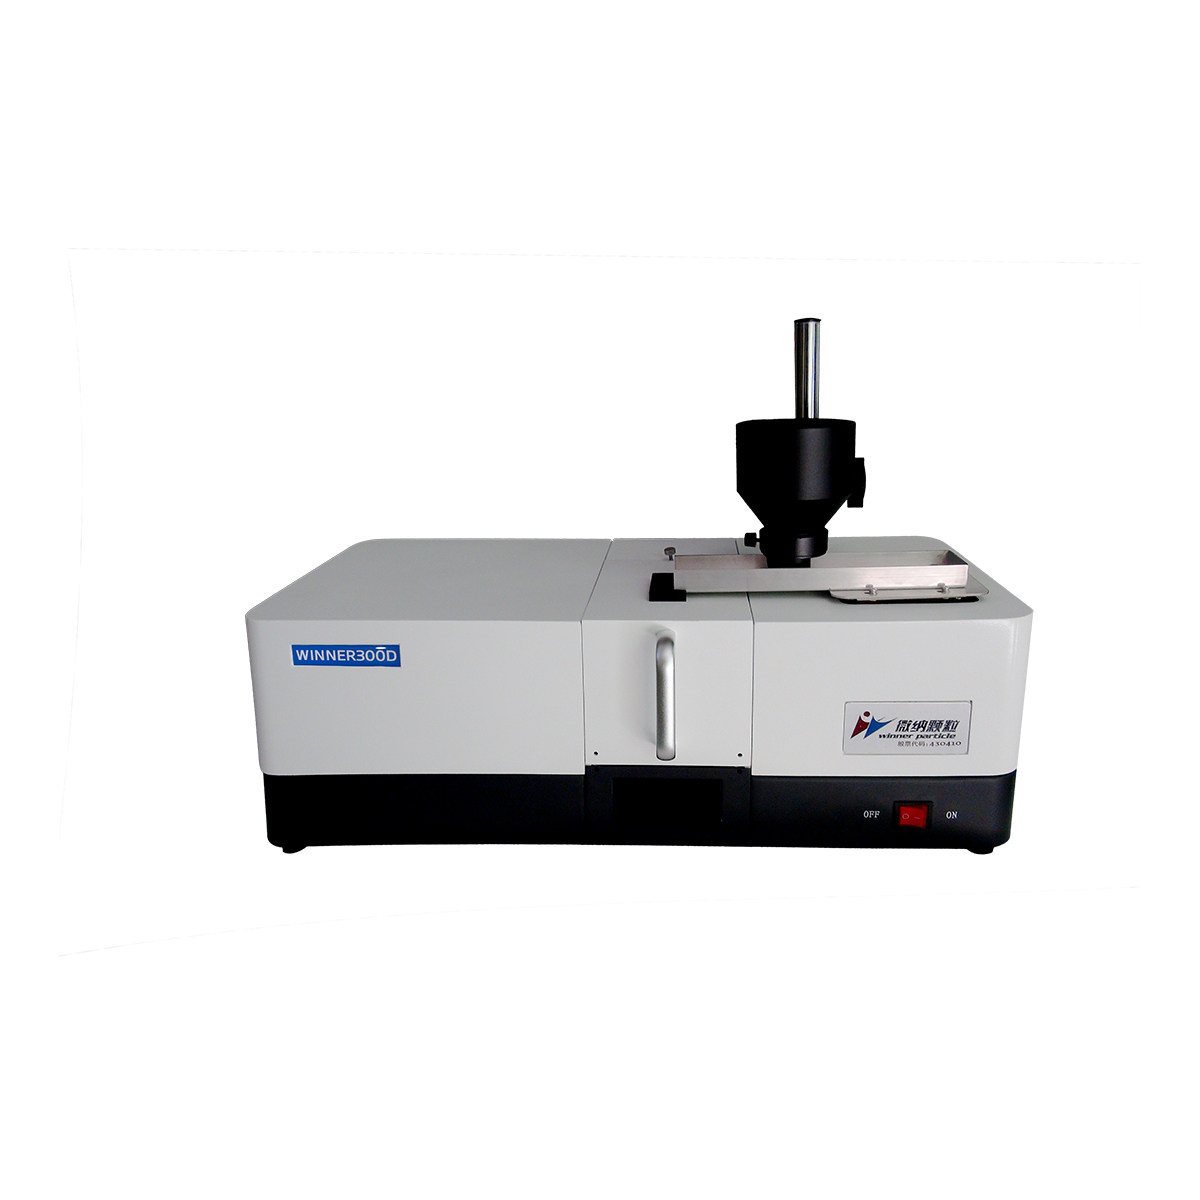 Winner300D Dynamic Particle Image Analyzer for powders